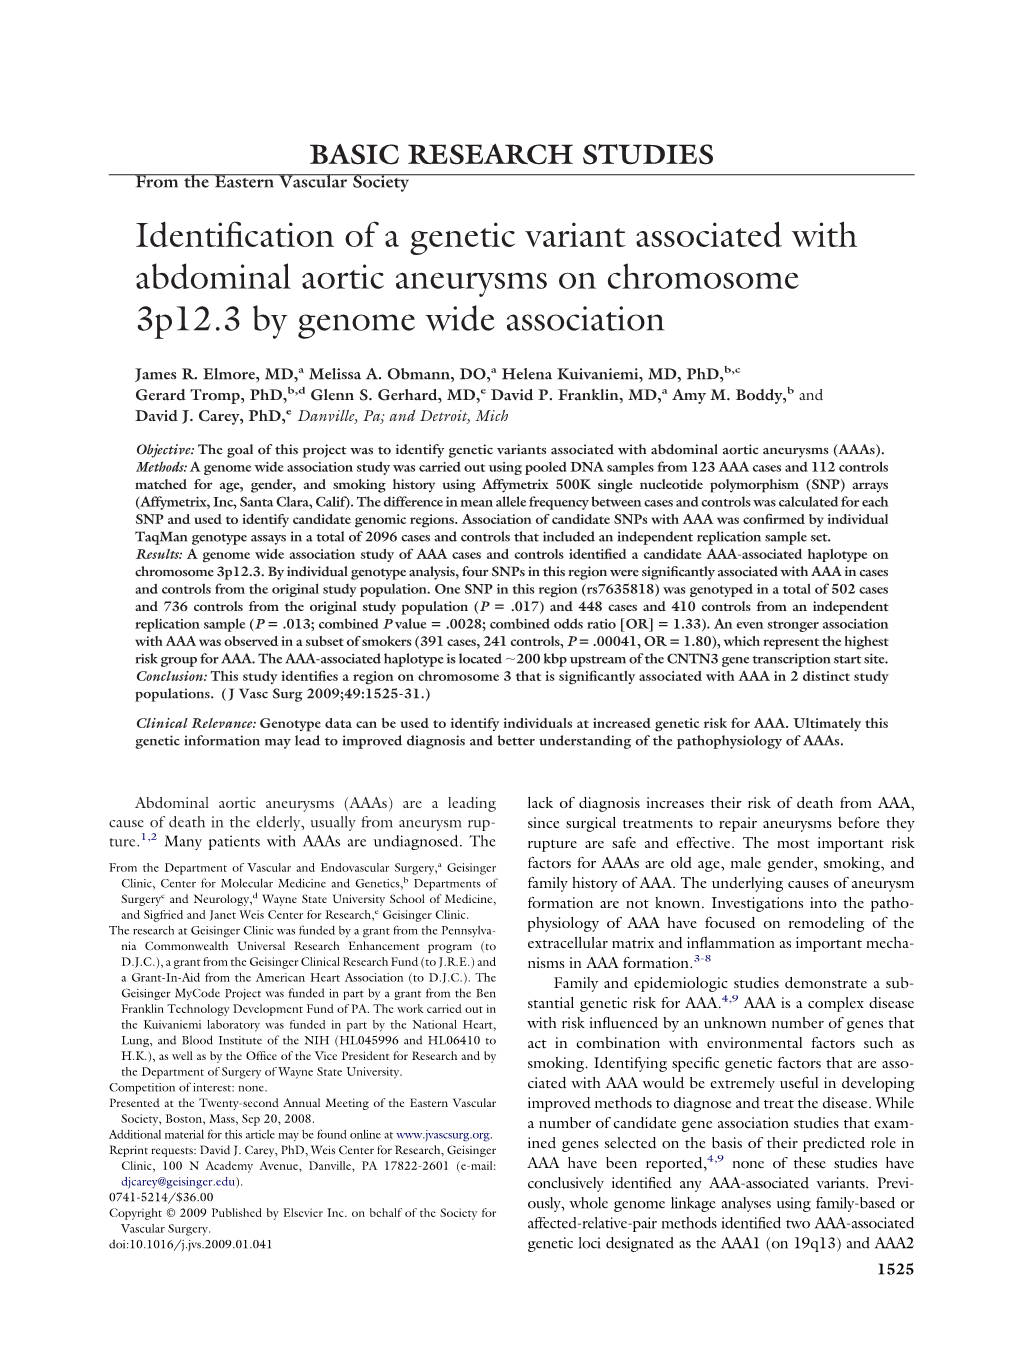 Identification of a Genetic Variant Associated with Abdominal Aortic